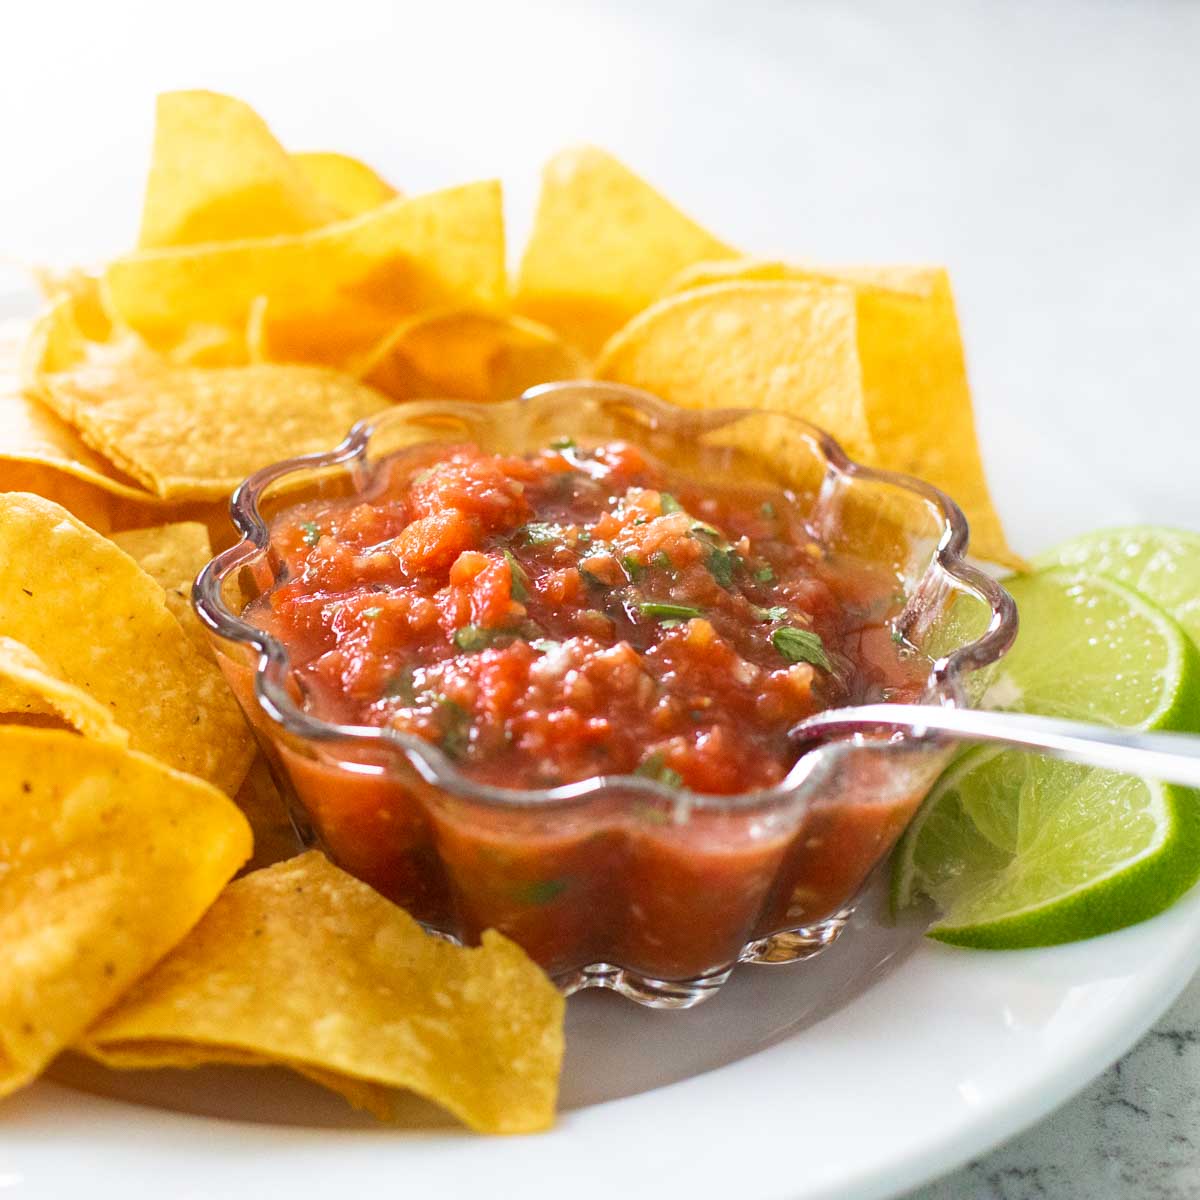 A bowl of homemade salsa has a spoon on the right and a pile of restaurant style tortilla chips on the plate around it.